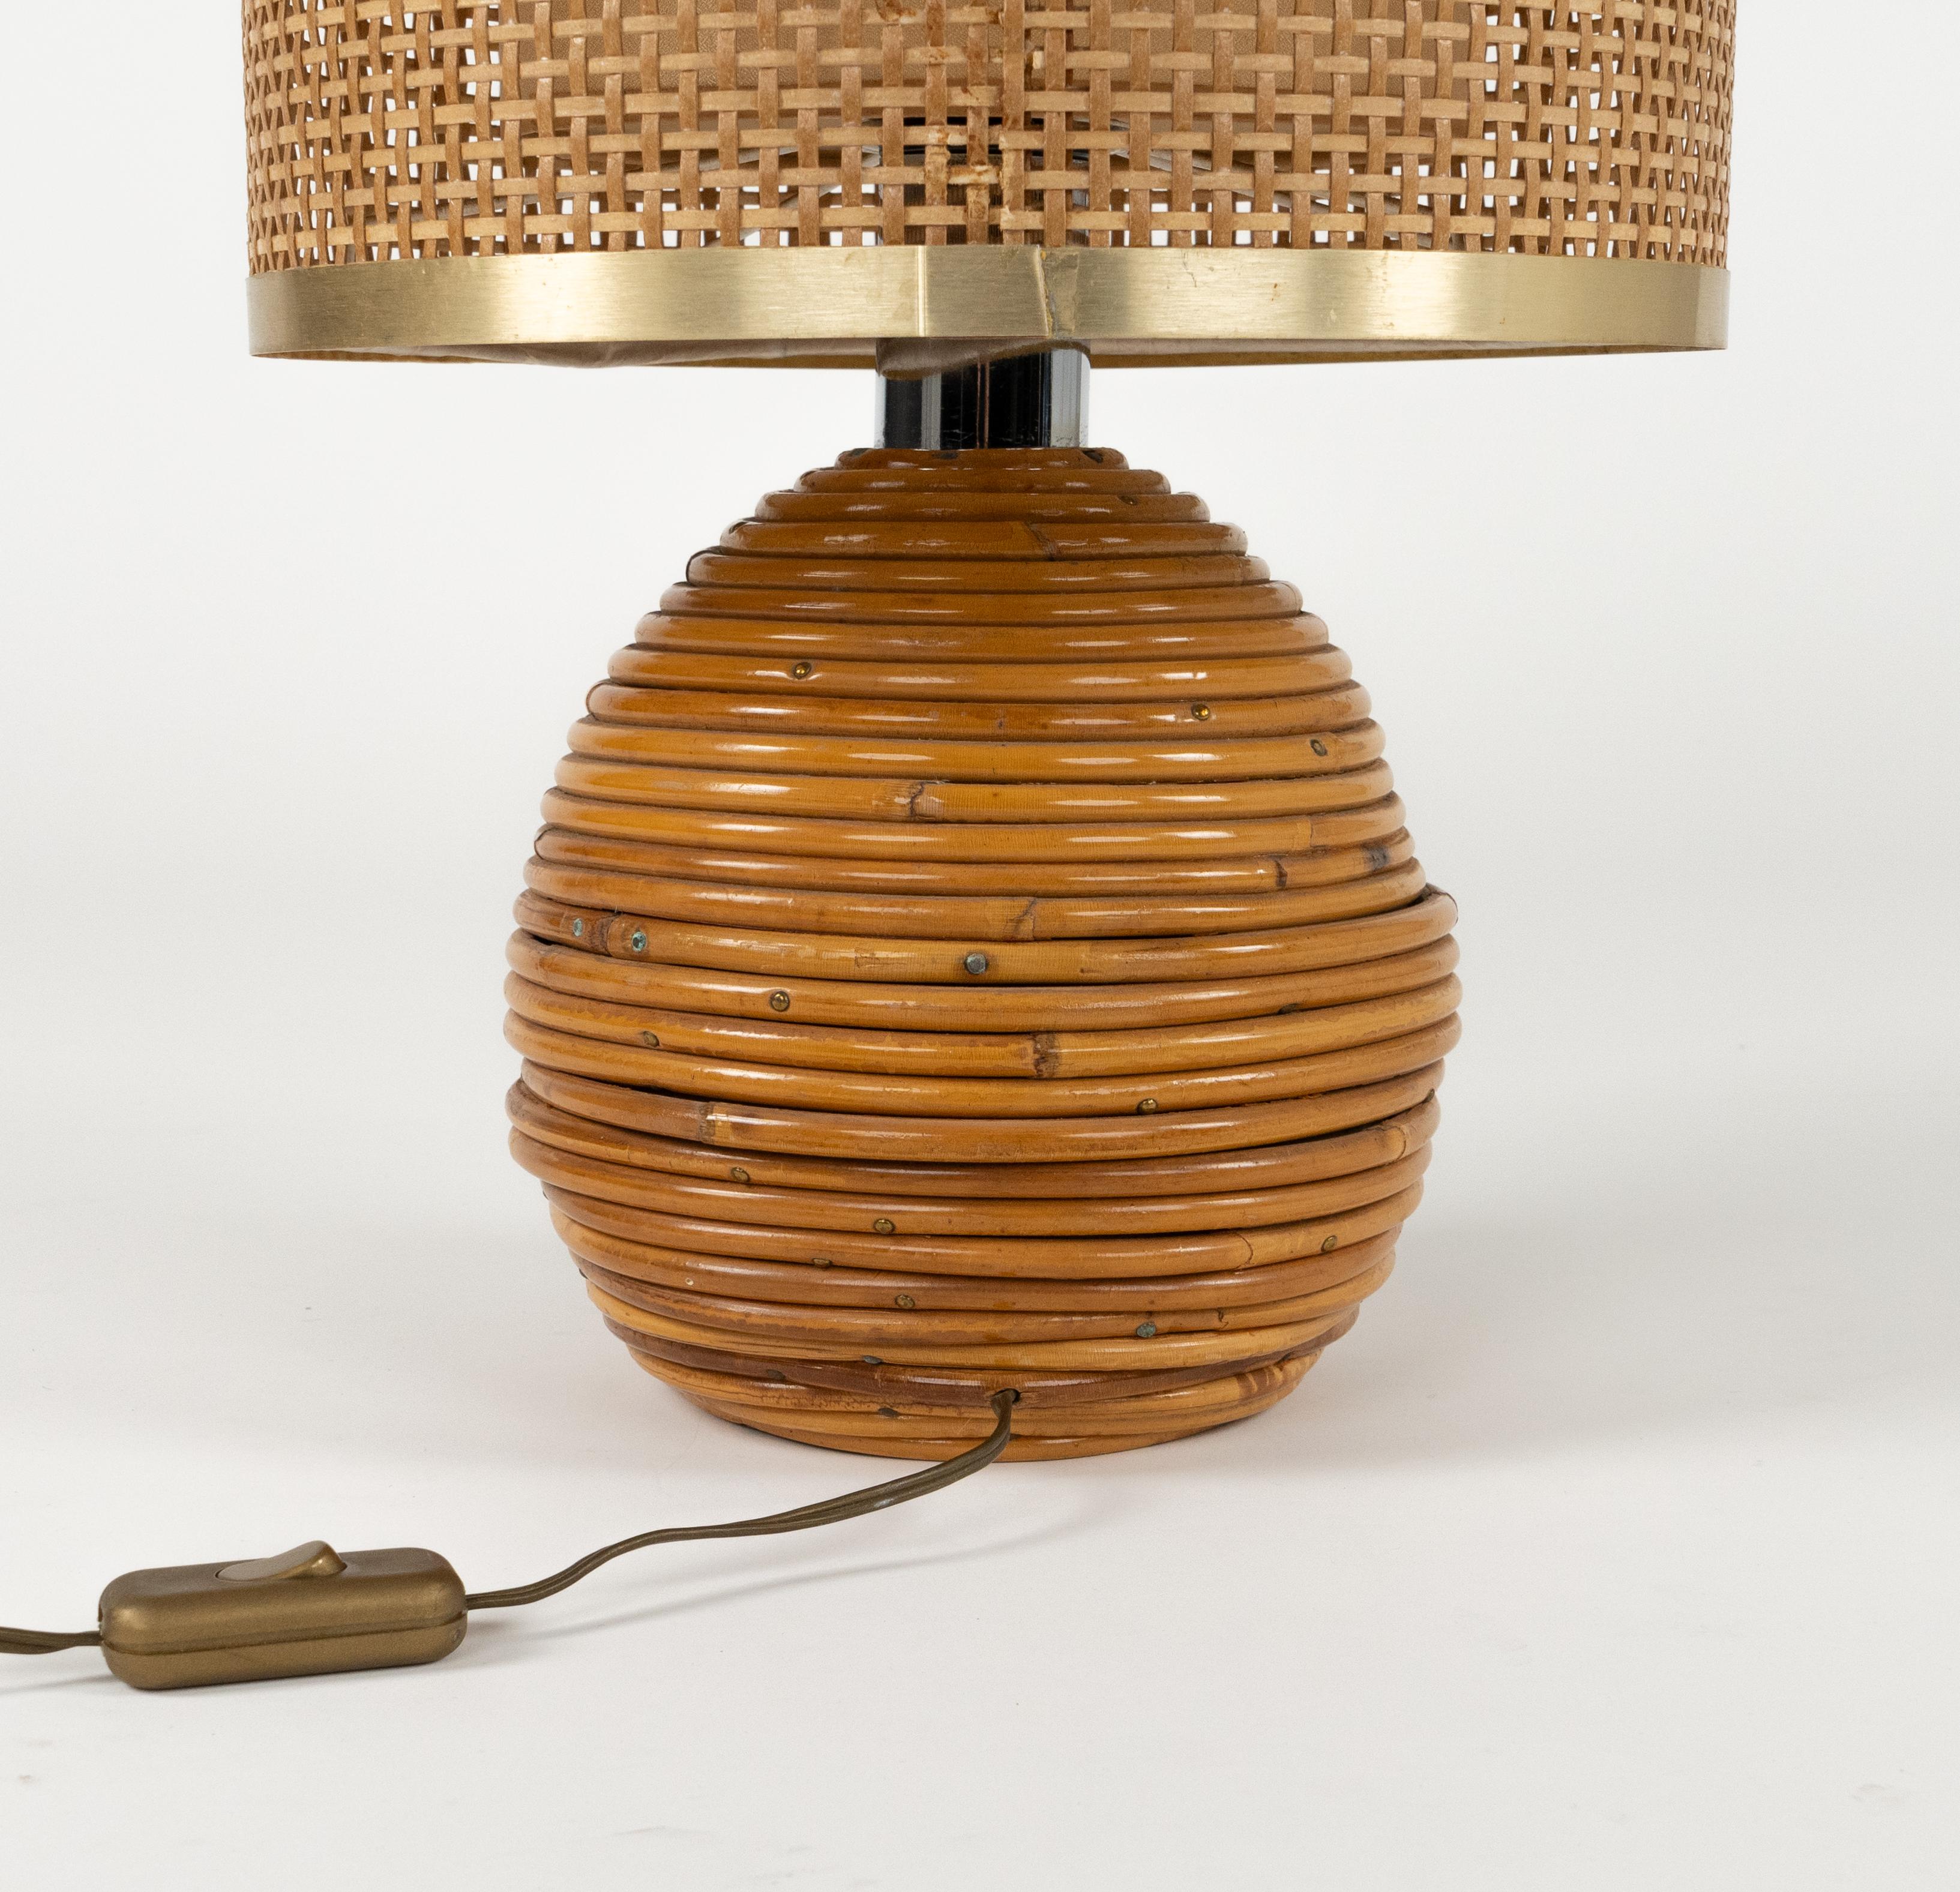 Midcentury Rattan, Wicker and Chrome Table Lamp by Vivai Del Sud, Italy 1970s For Sale 5